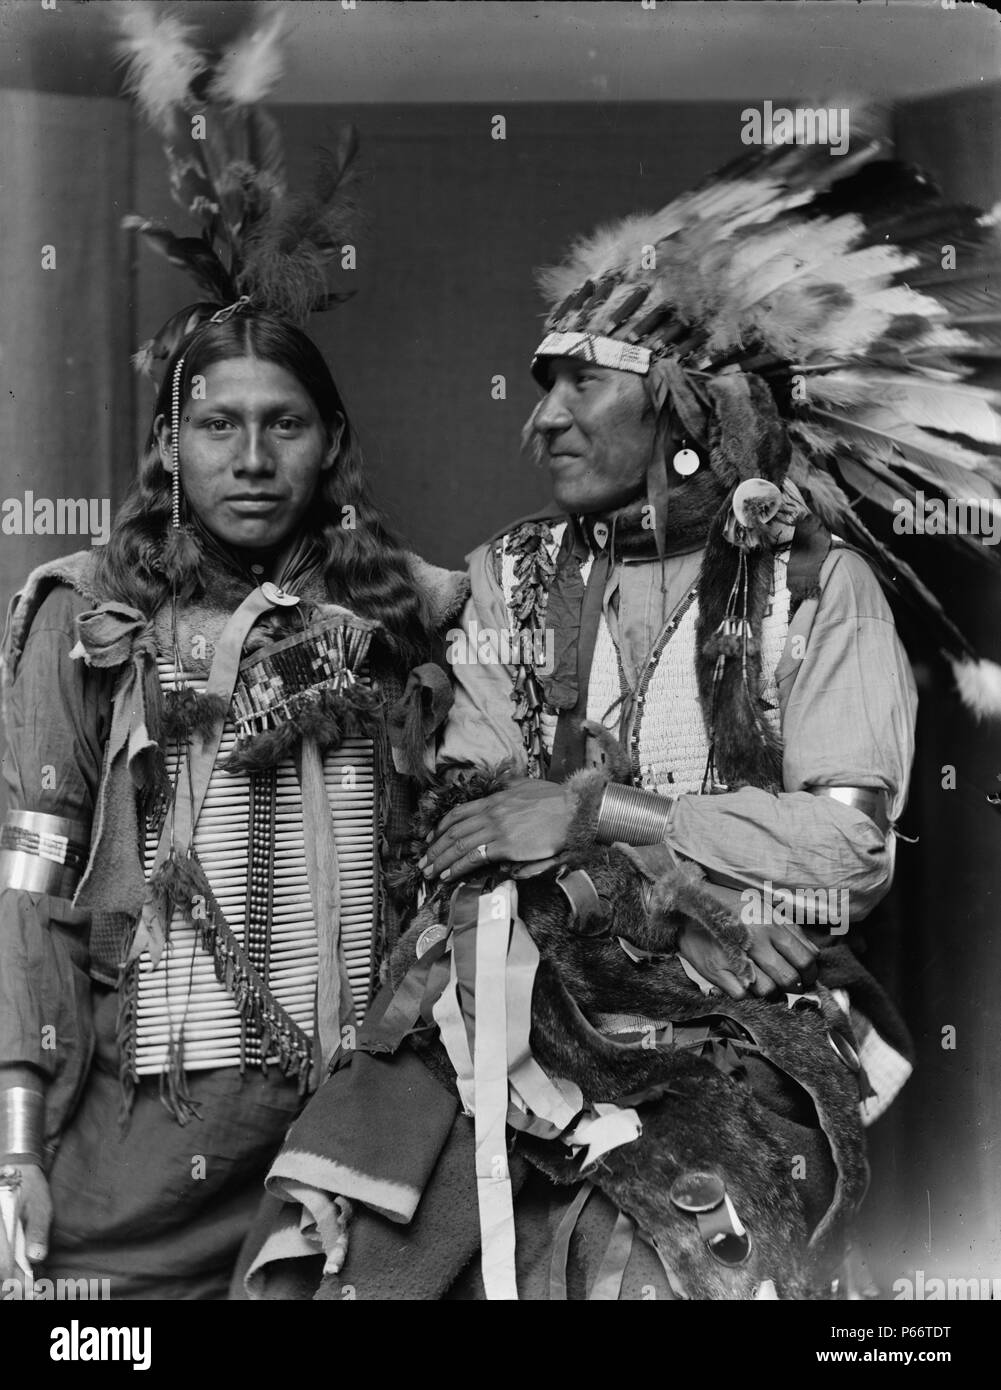 American Indians by Photographer Gertrude Käsebier, 1852-1934. Holy Frog (left) and Big Turnips were probably members of Buffalo Bill's Wild West Show, half-length portrait, one wearing a headdress. Dated ca. 1900 Stock Photo